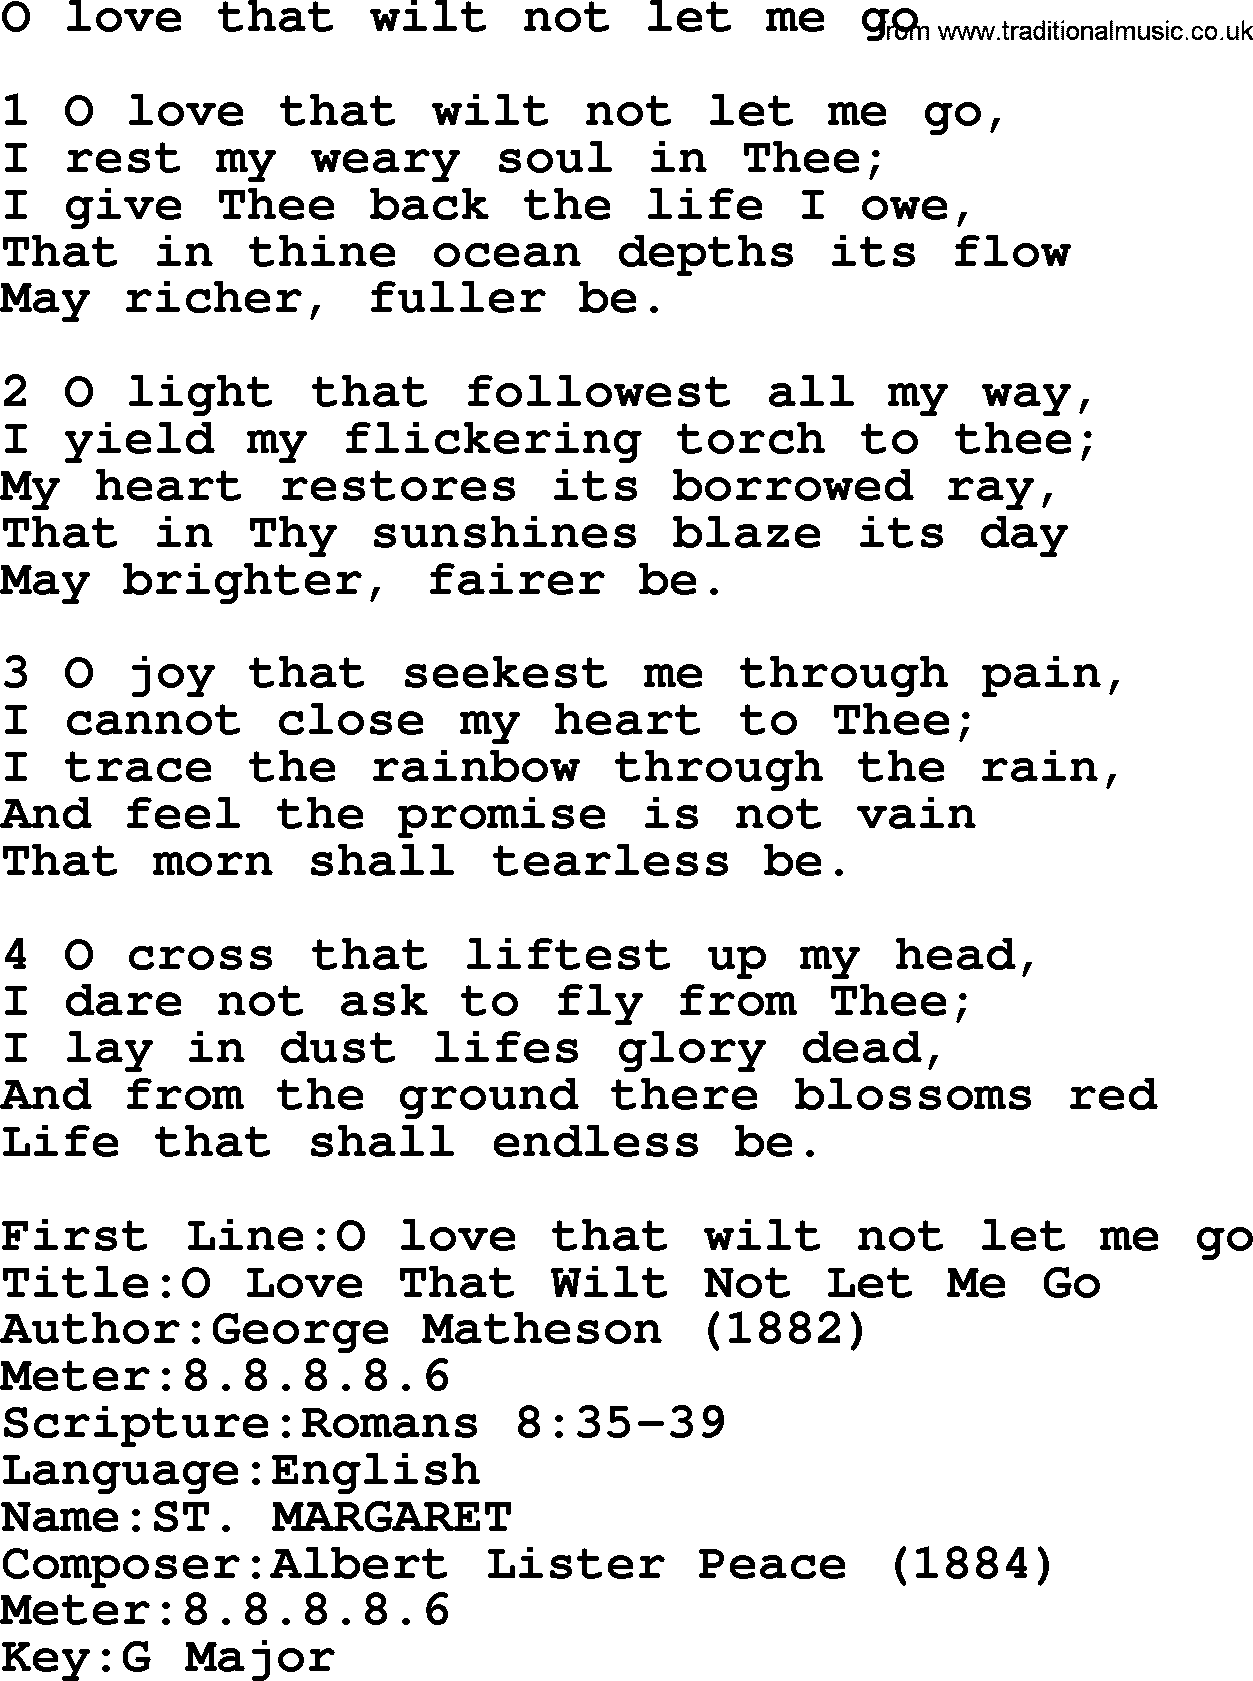 Presbyterian Hymns collection, Hymn: O Love That Wilt Not Let Me Go, lyrics and PDF